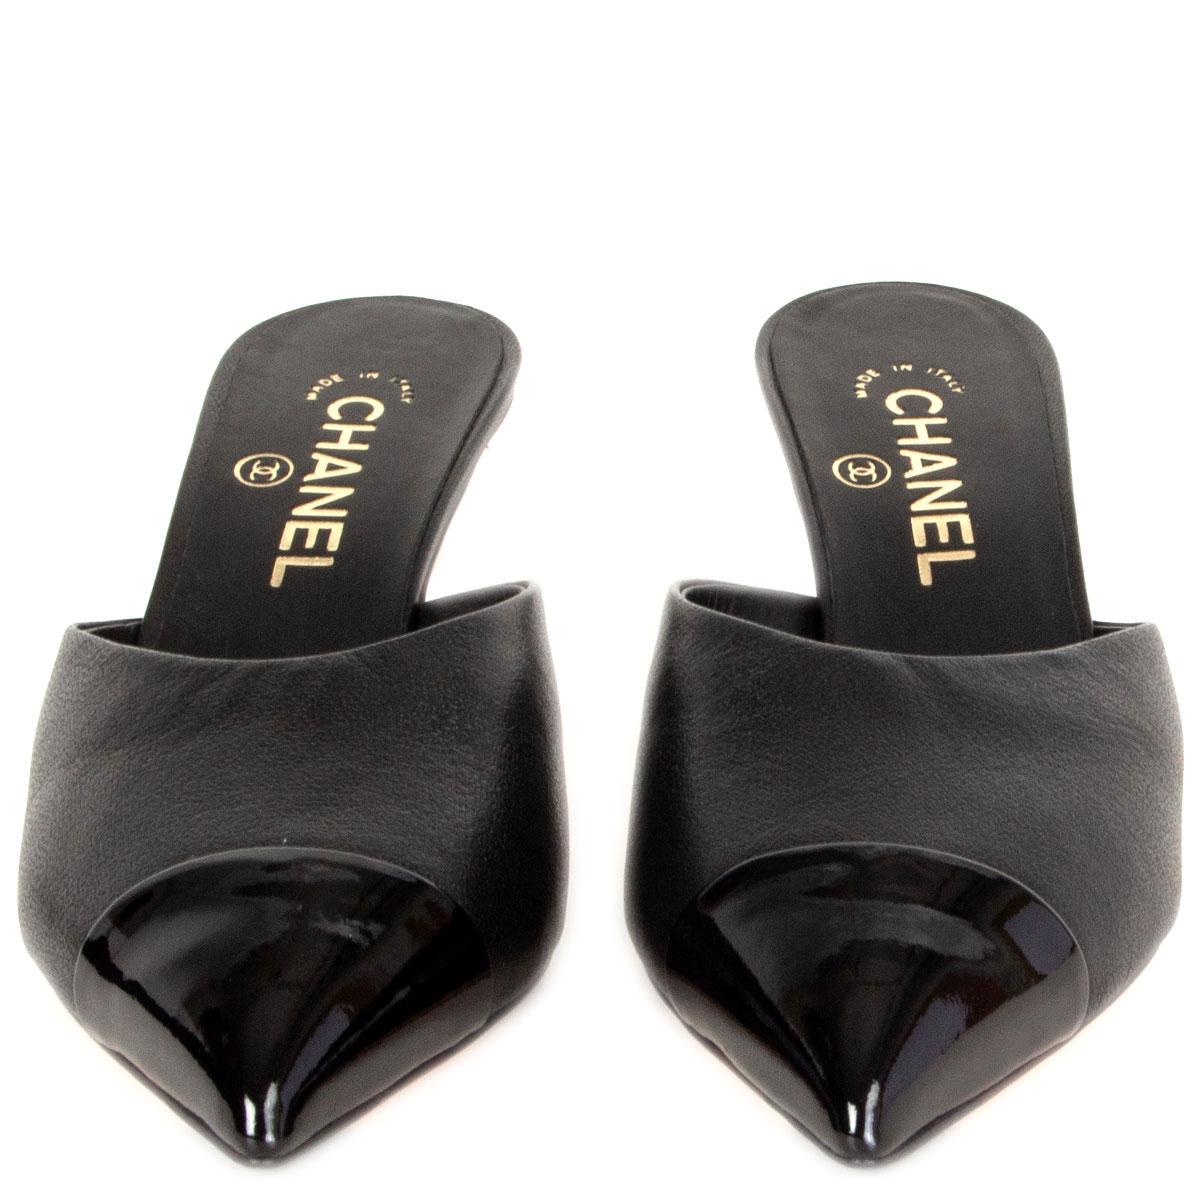 100% authentic Chanel kitten-heel pointed-toe mules in black leather with a patent leather tip featuring faux pearl detail on the heel. Brand new. Come with dust bag. 

Measurements
Imprinted Size	38.5
Shoe Size	38.5
Inside Sole	25cm